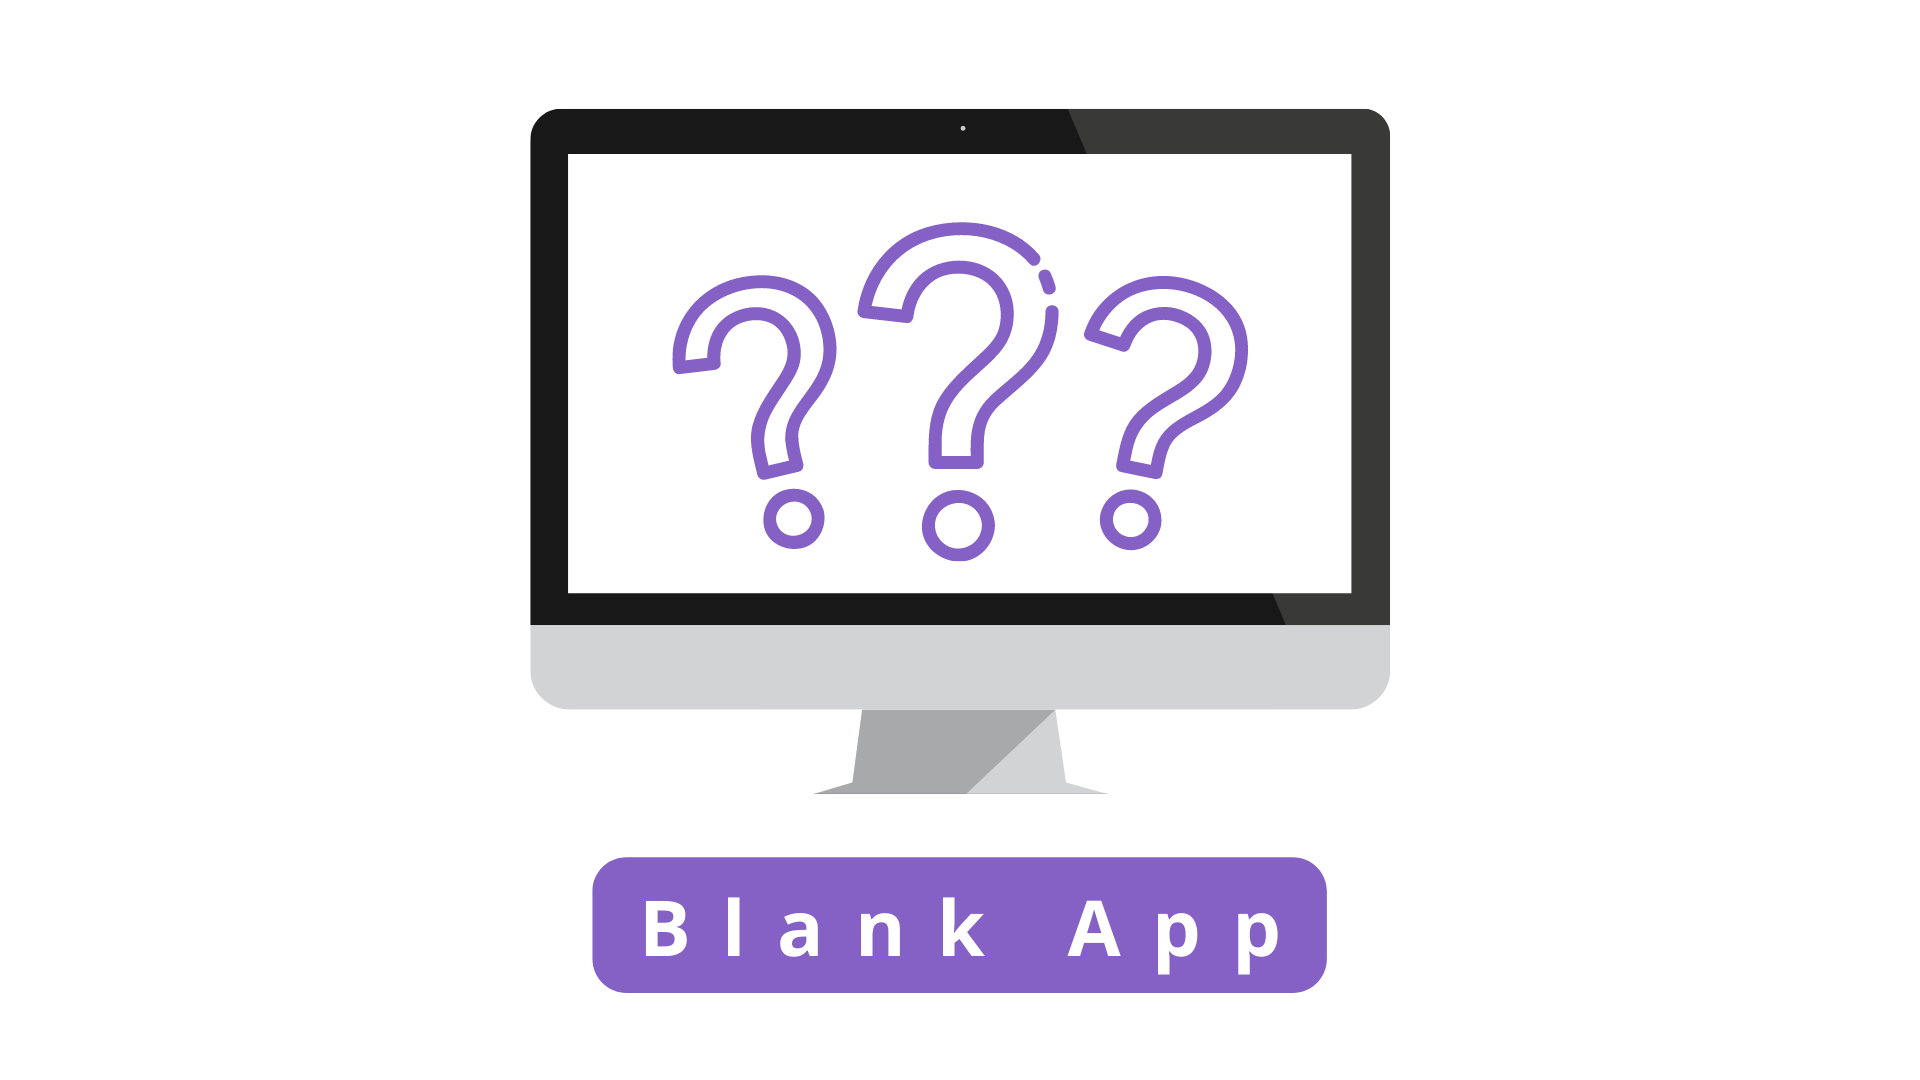 Diagram showing a blank app to build for your solution.